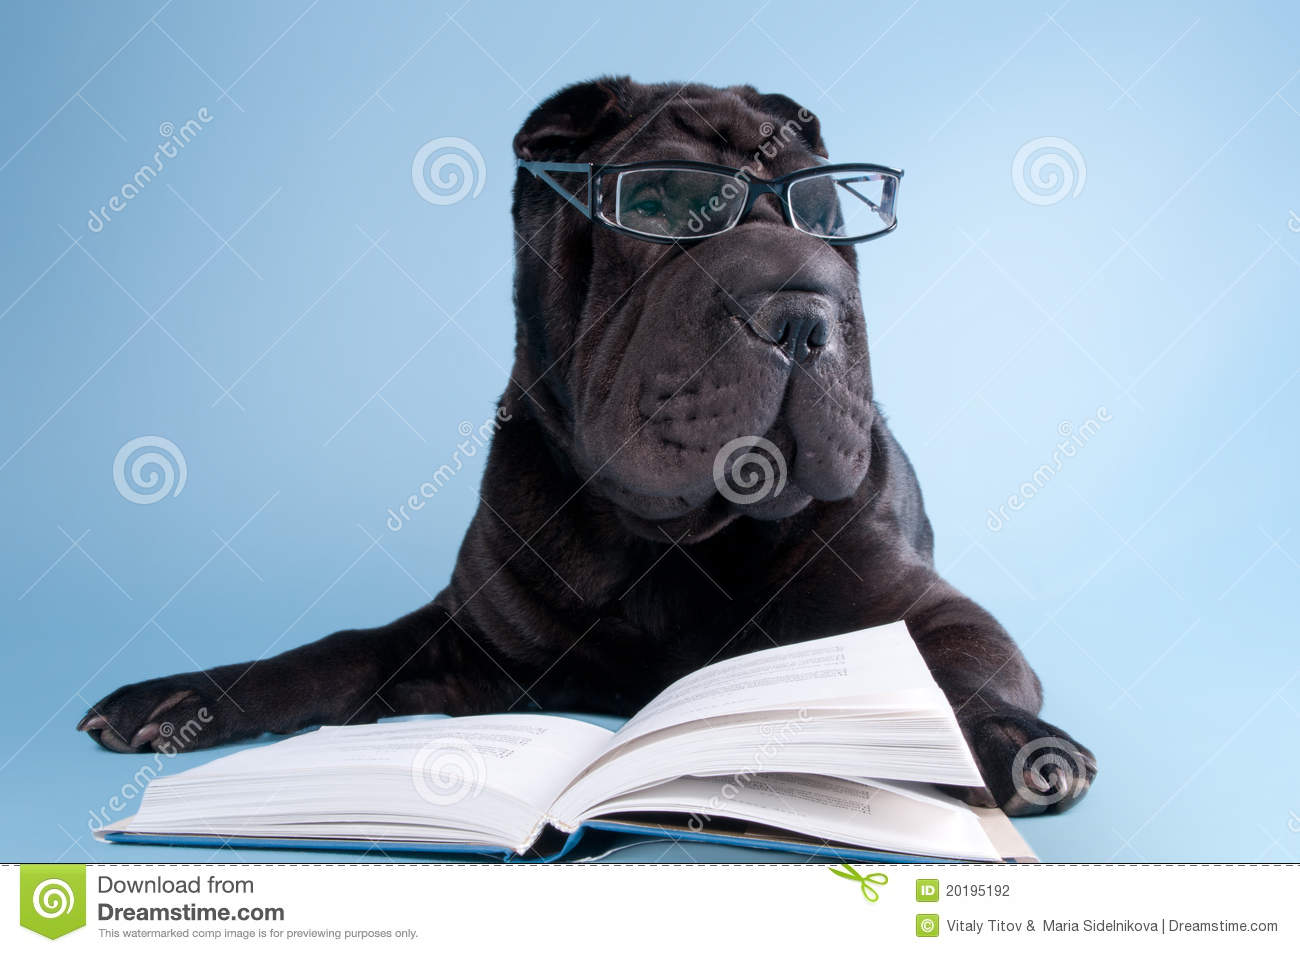 Black Shar Pei Dog Wearing Glasses And Reading Book